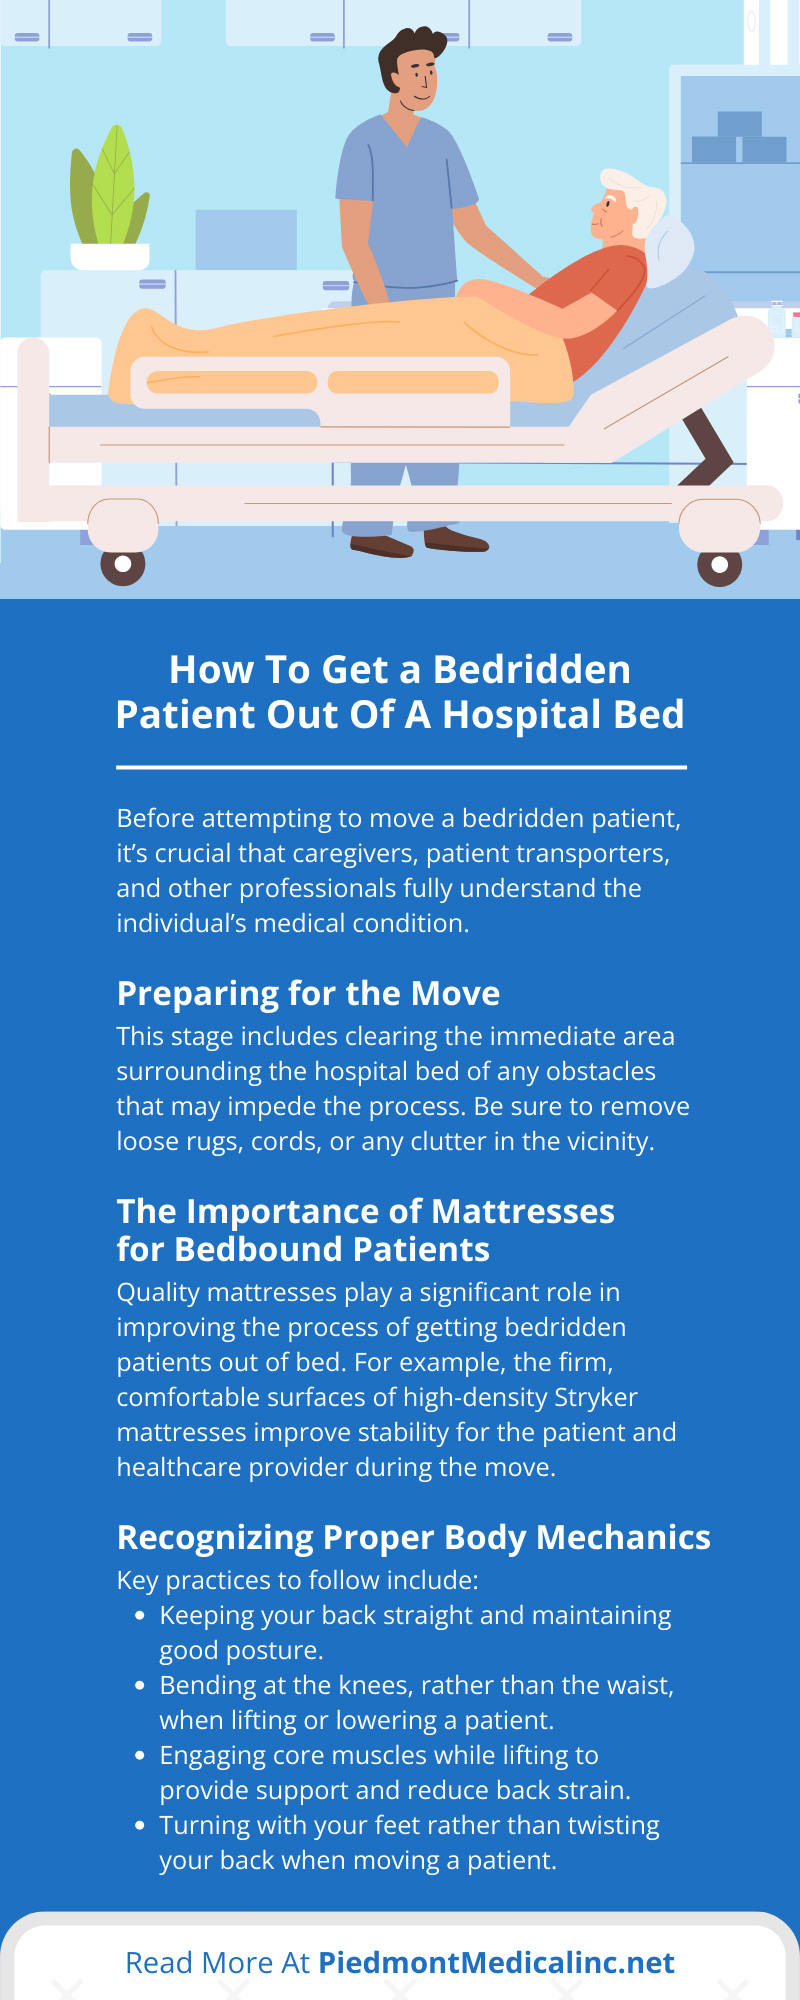 How To Get a Bedridden Patient out of a Hospital Bed